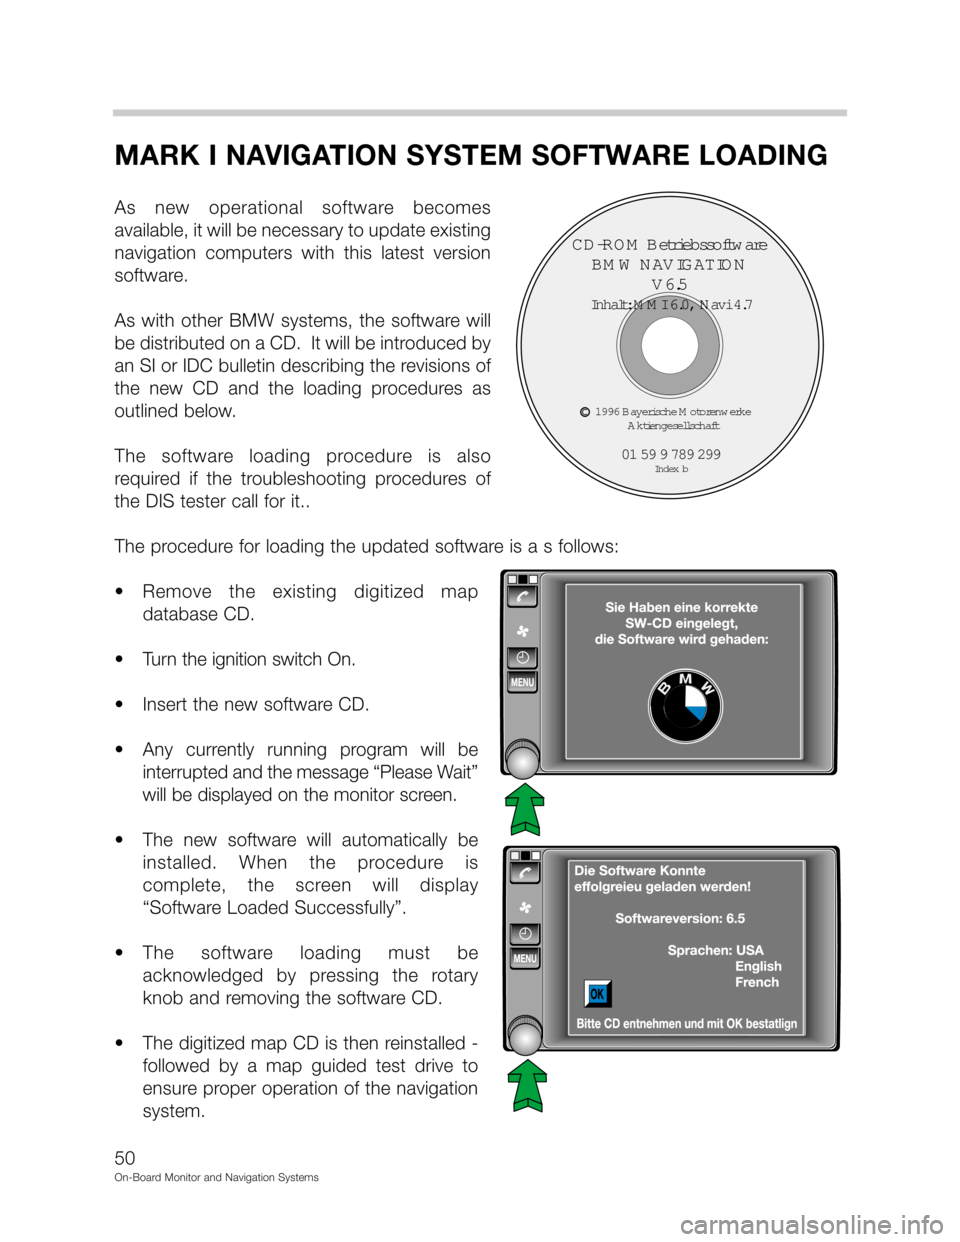 BMW 7 SERIES 1998 E38 On Board Monitor System Workshop Manual 	>
4
8

	5@3
8
 
% 

 % 	
&6%




&
 	
 %   &
%
 